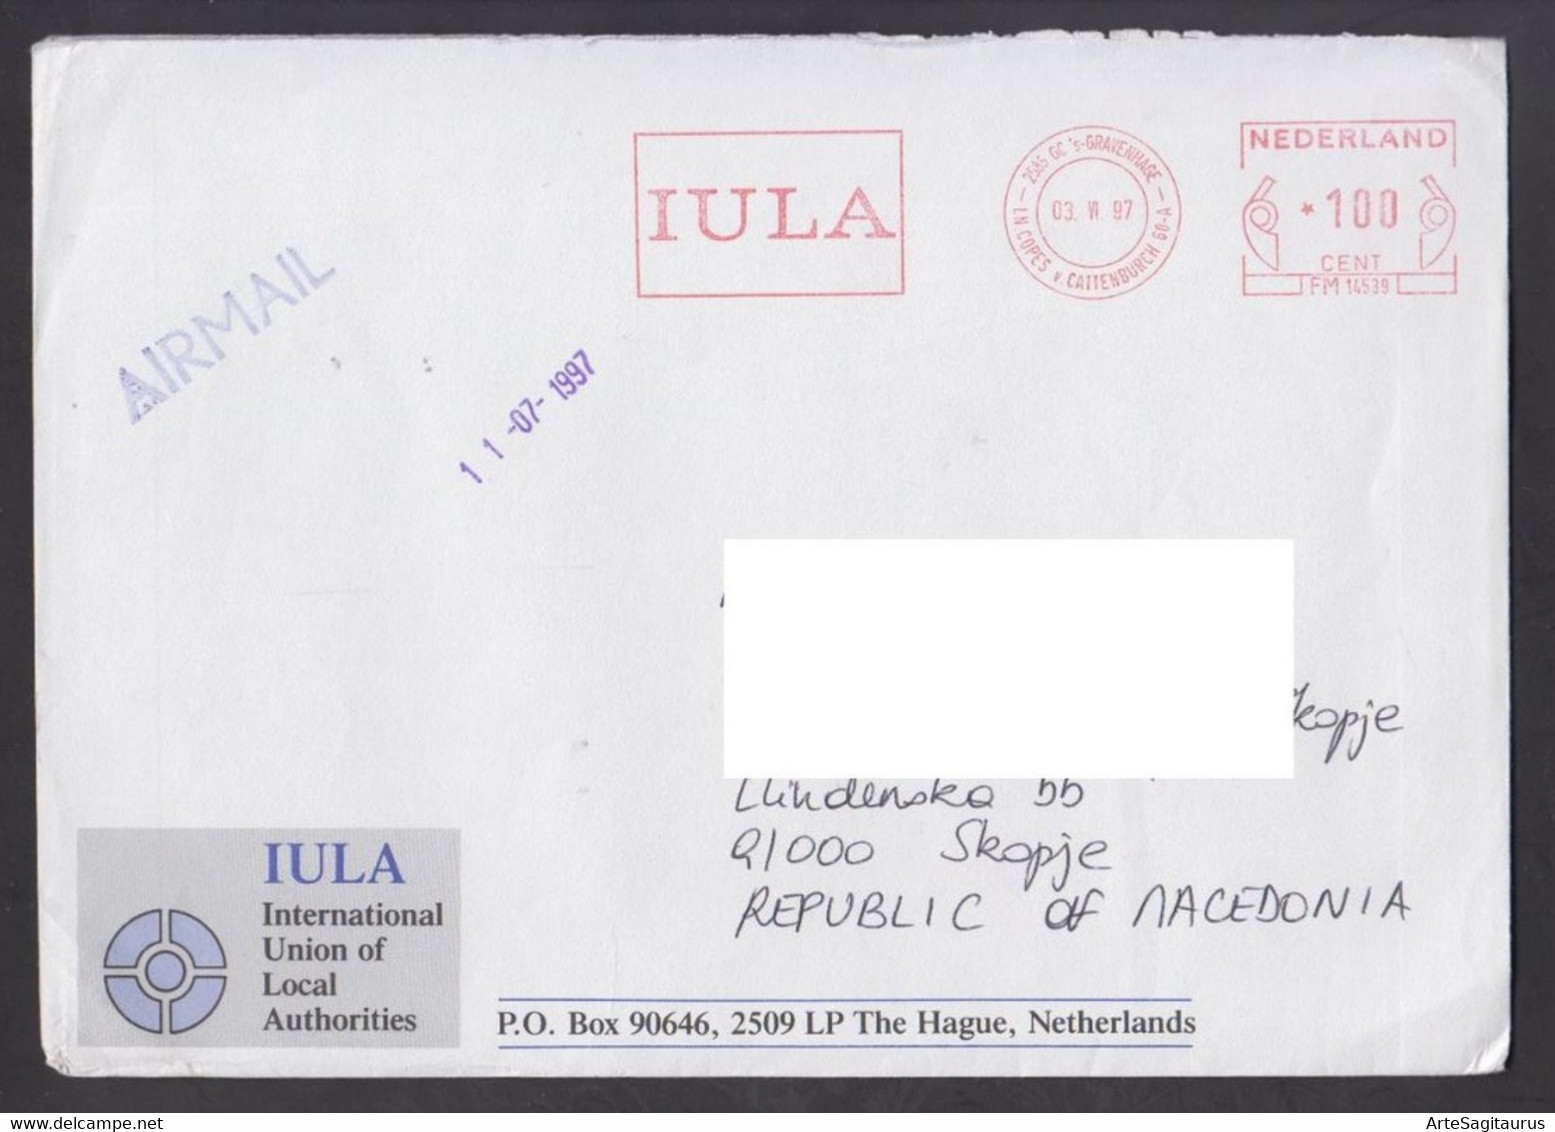 NETHERLANDS, COVER - Republic Of Macedonia, Flamme, Air Mail  (006) - Briefe U. Dokumente